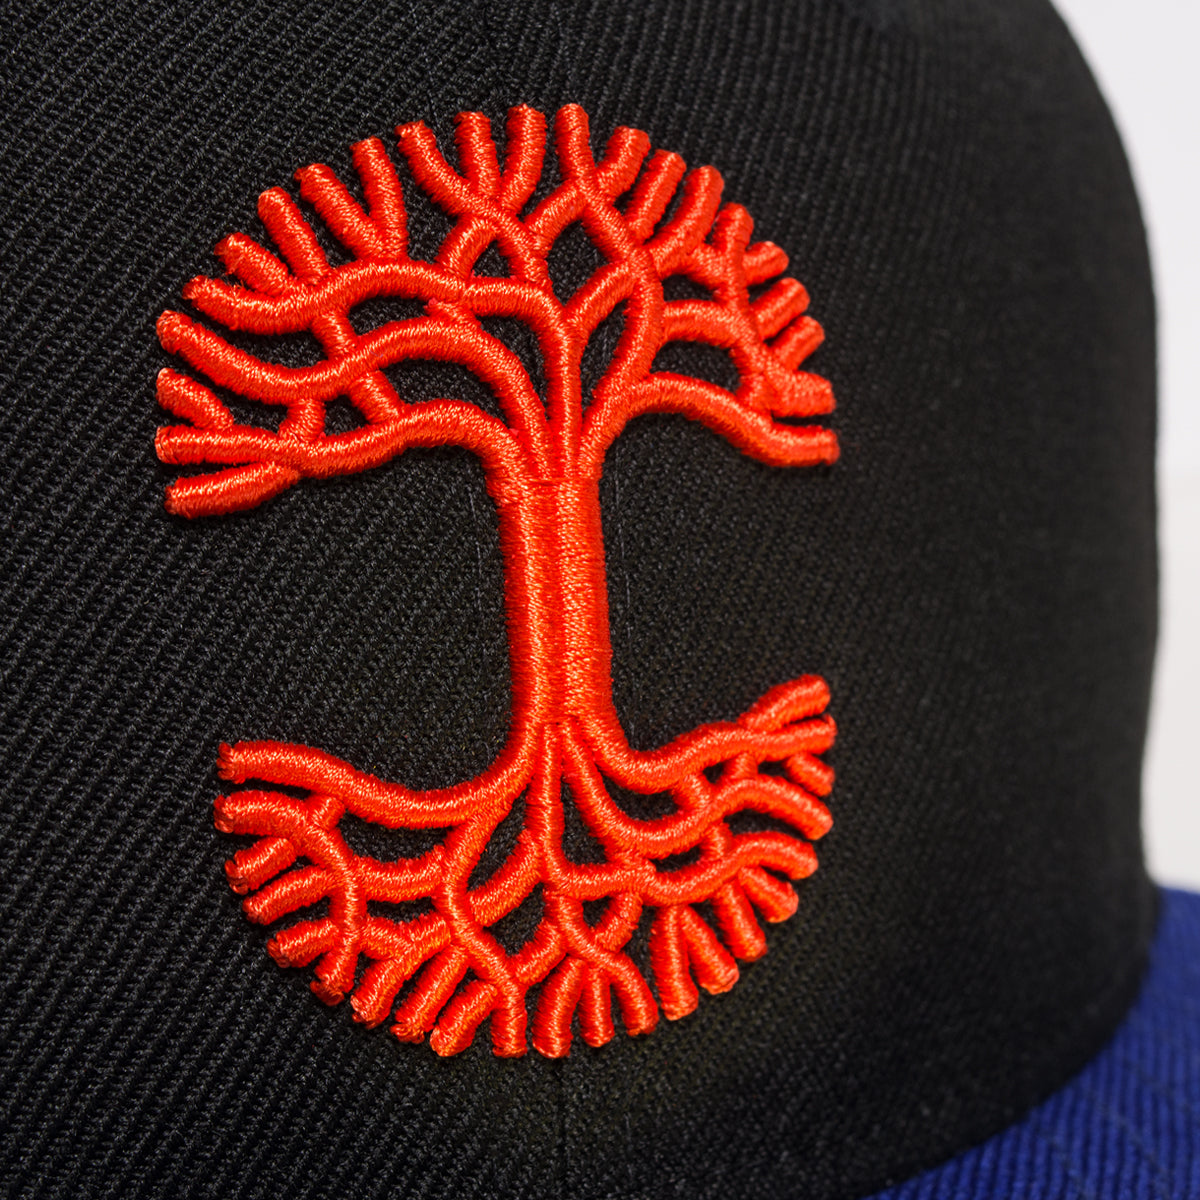 Close-up of red embroidered Oaklandish tree logo on the crown of a black New Era cap.